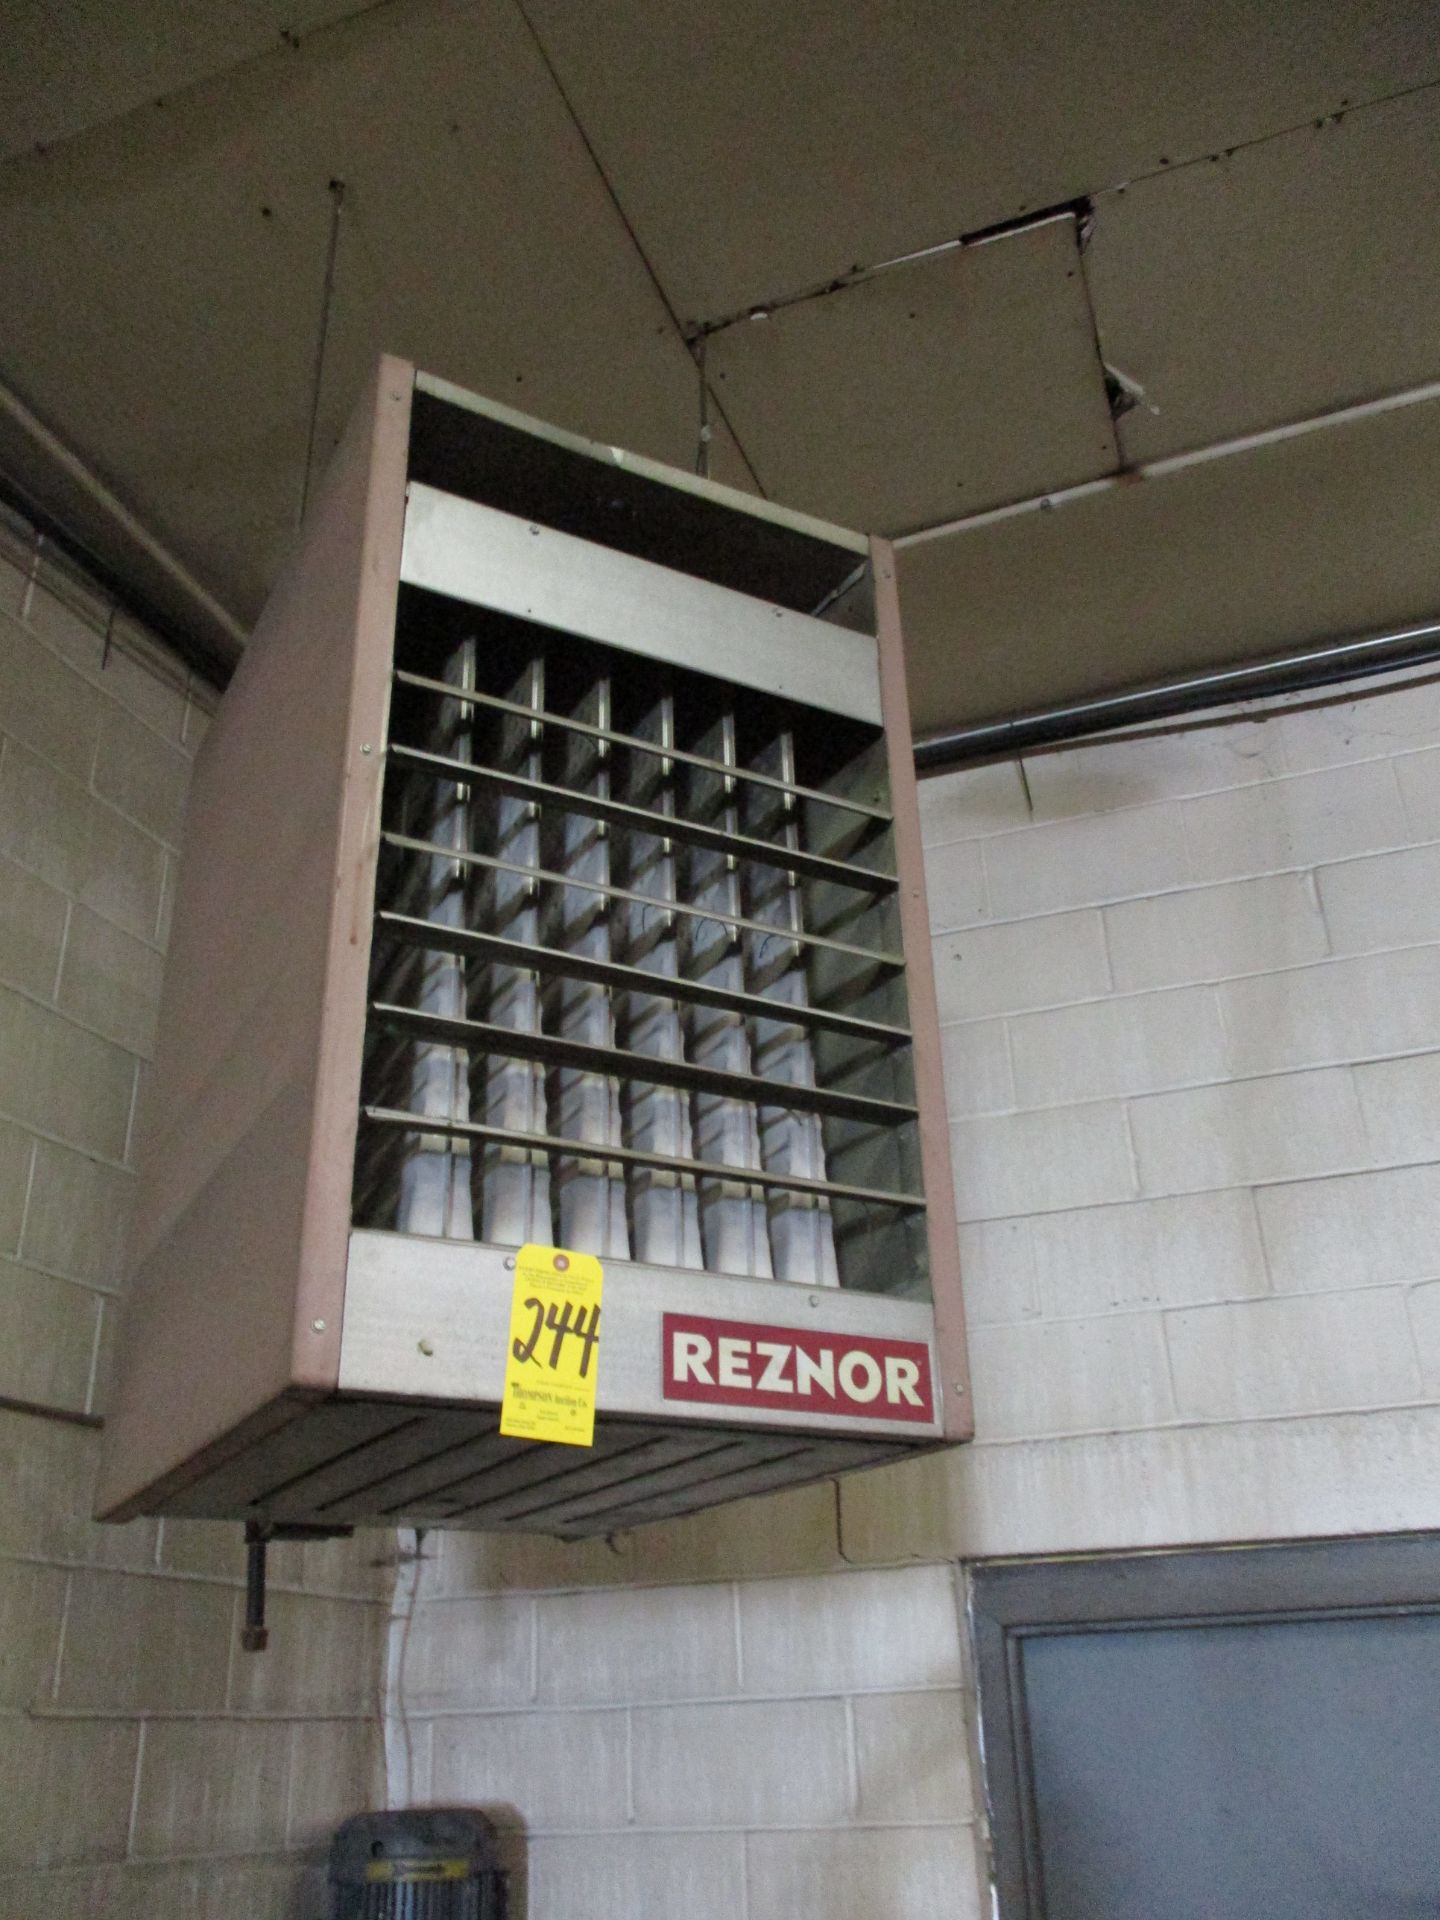 Reznor Ceiling Mounted Gas Furnace